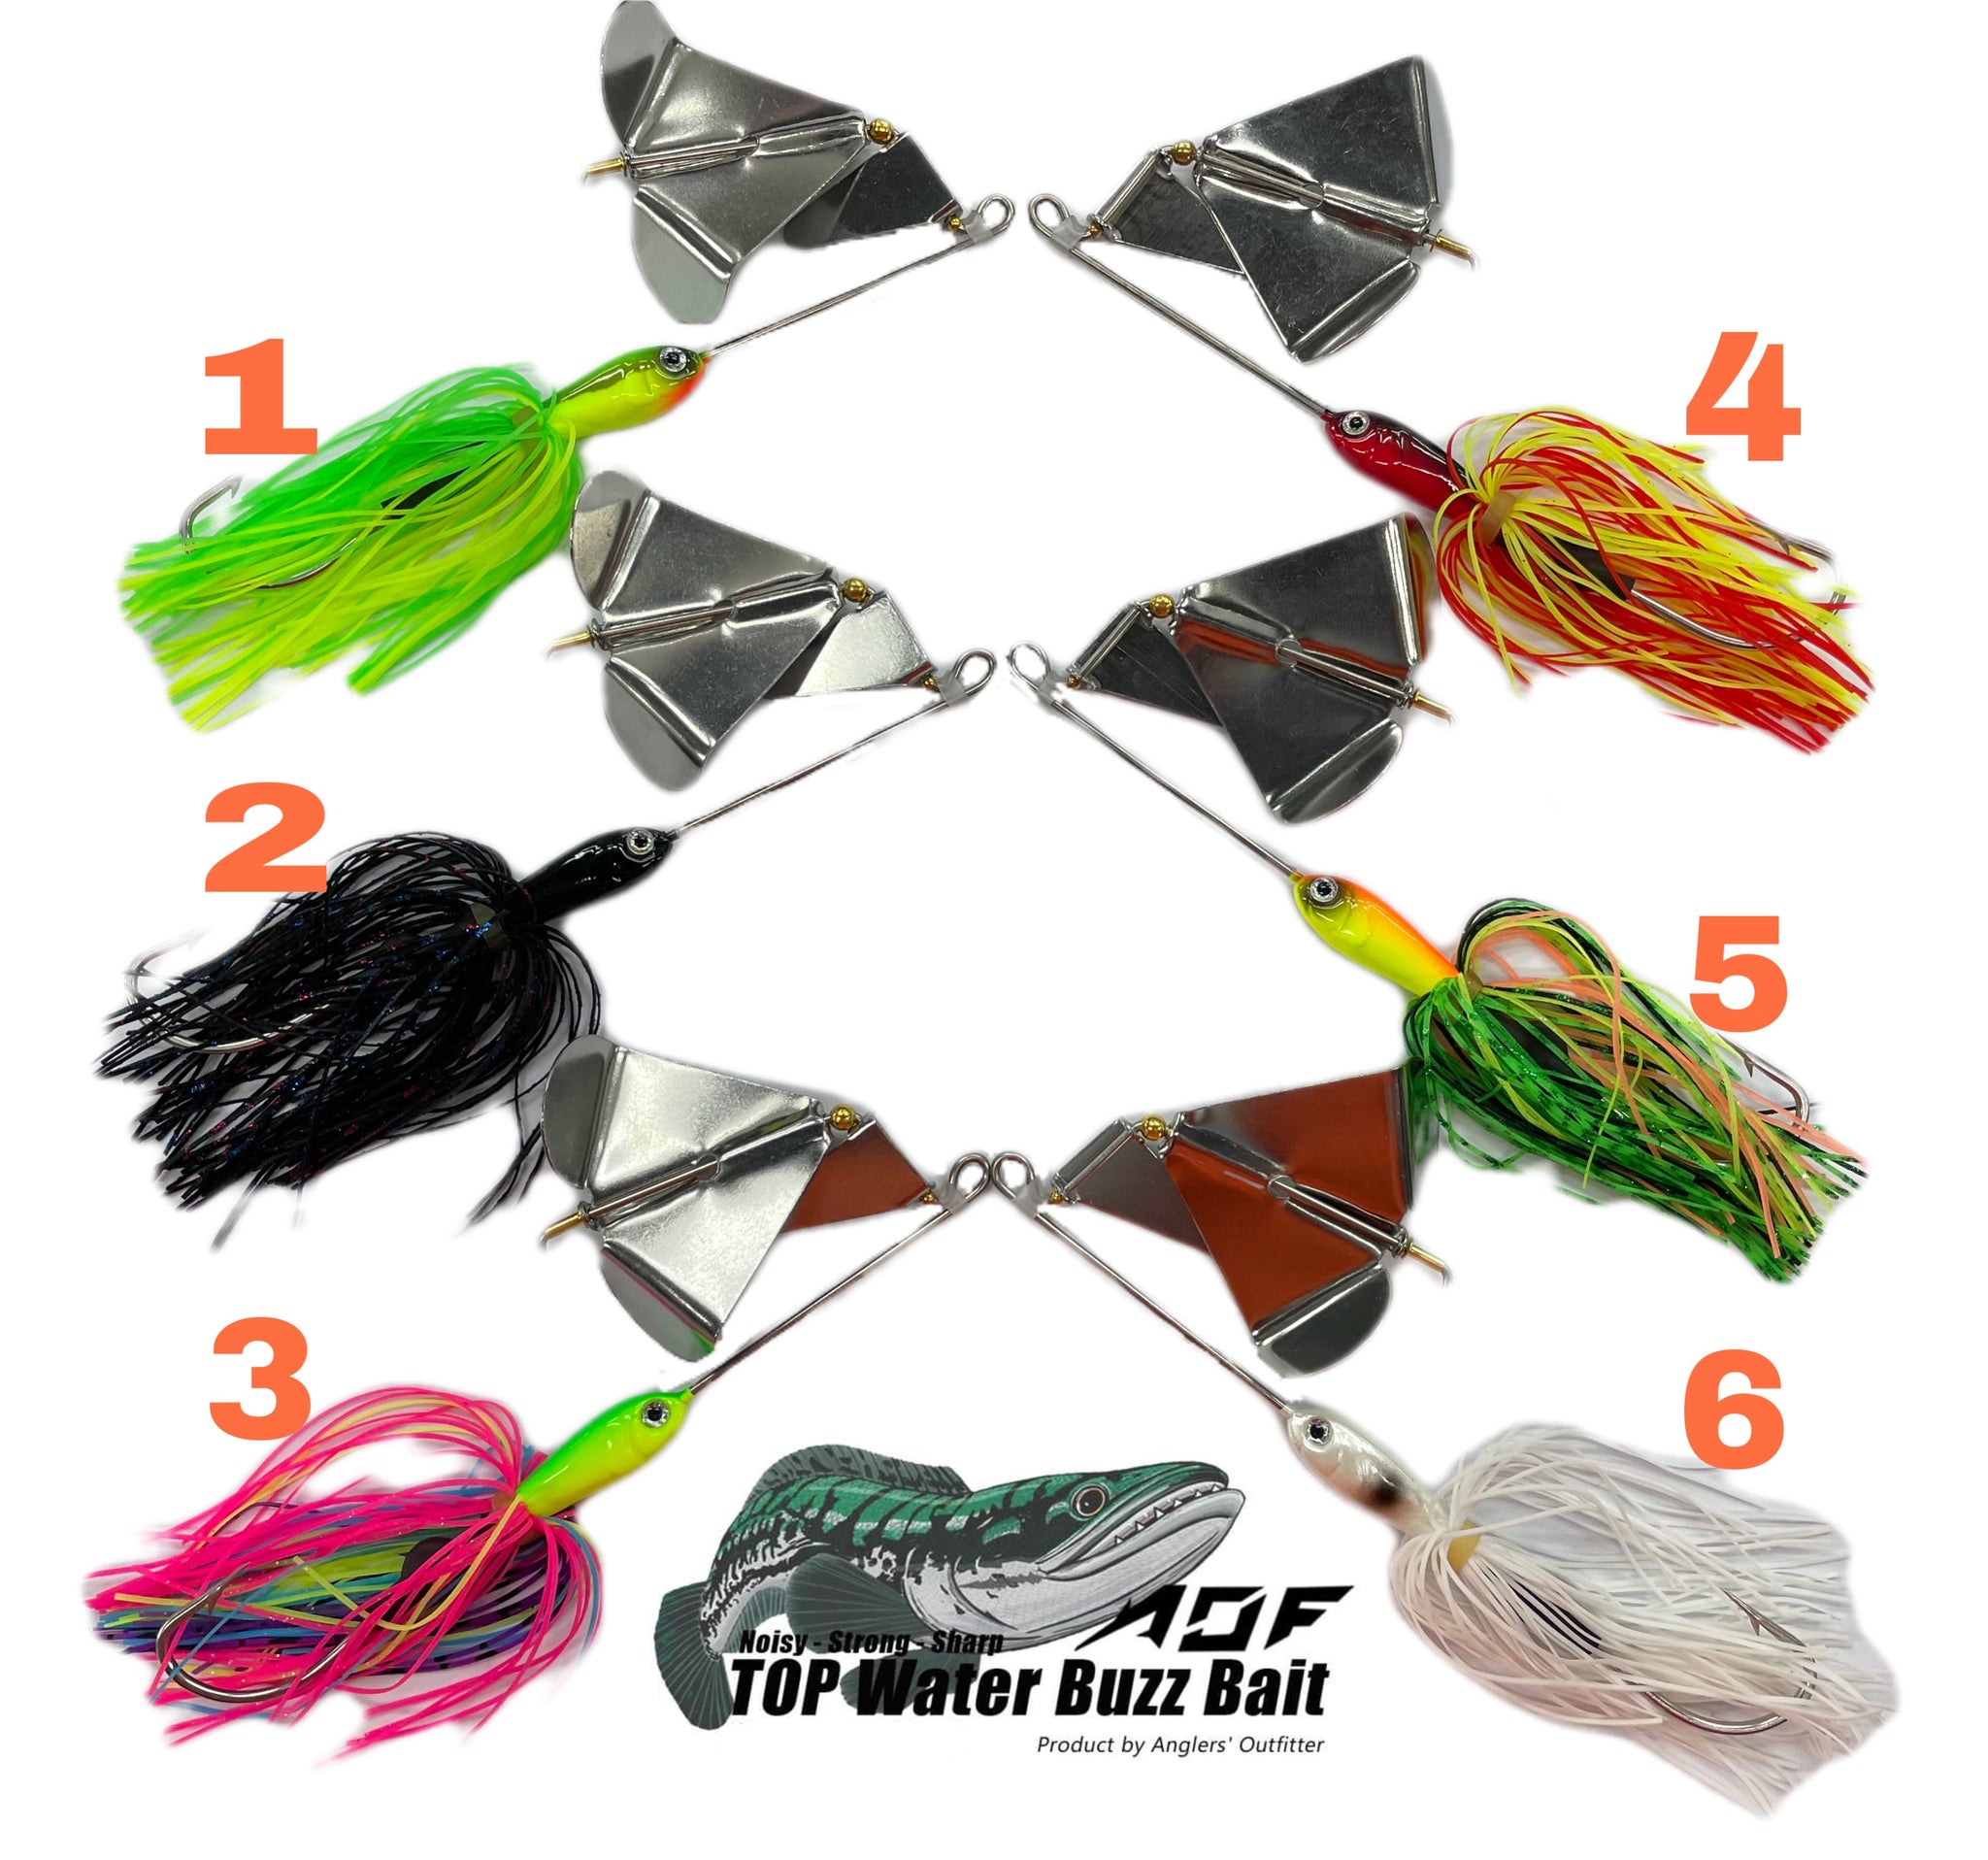 AOF Top Water Buzz Bait for Giant Snakehead (Flexible Hook